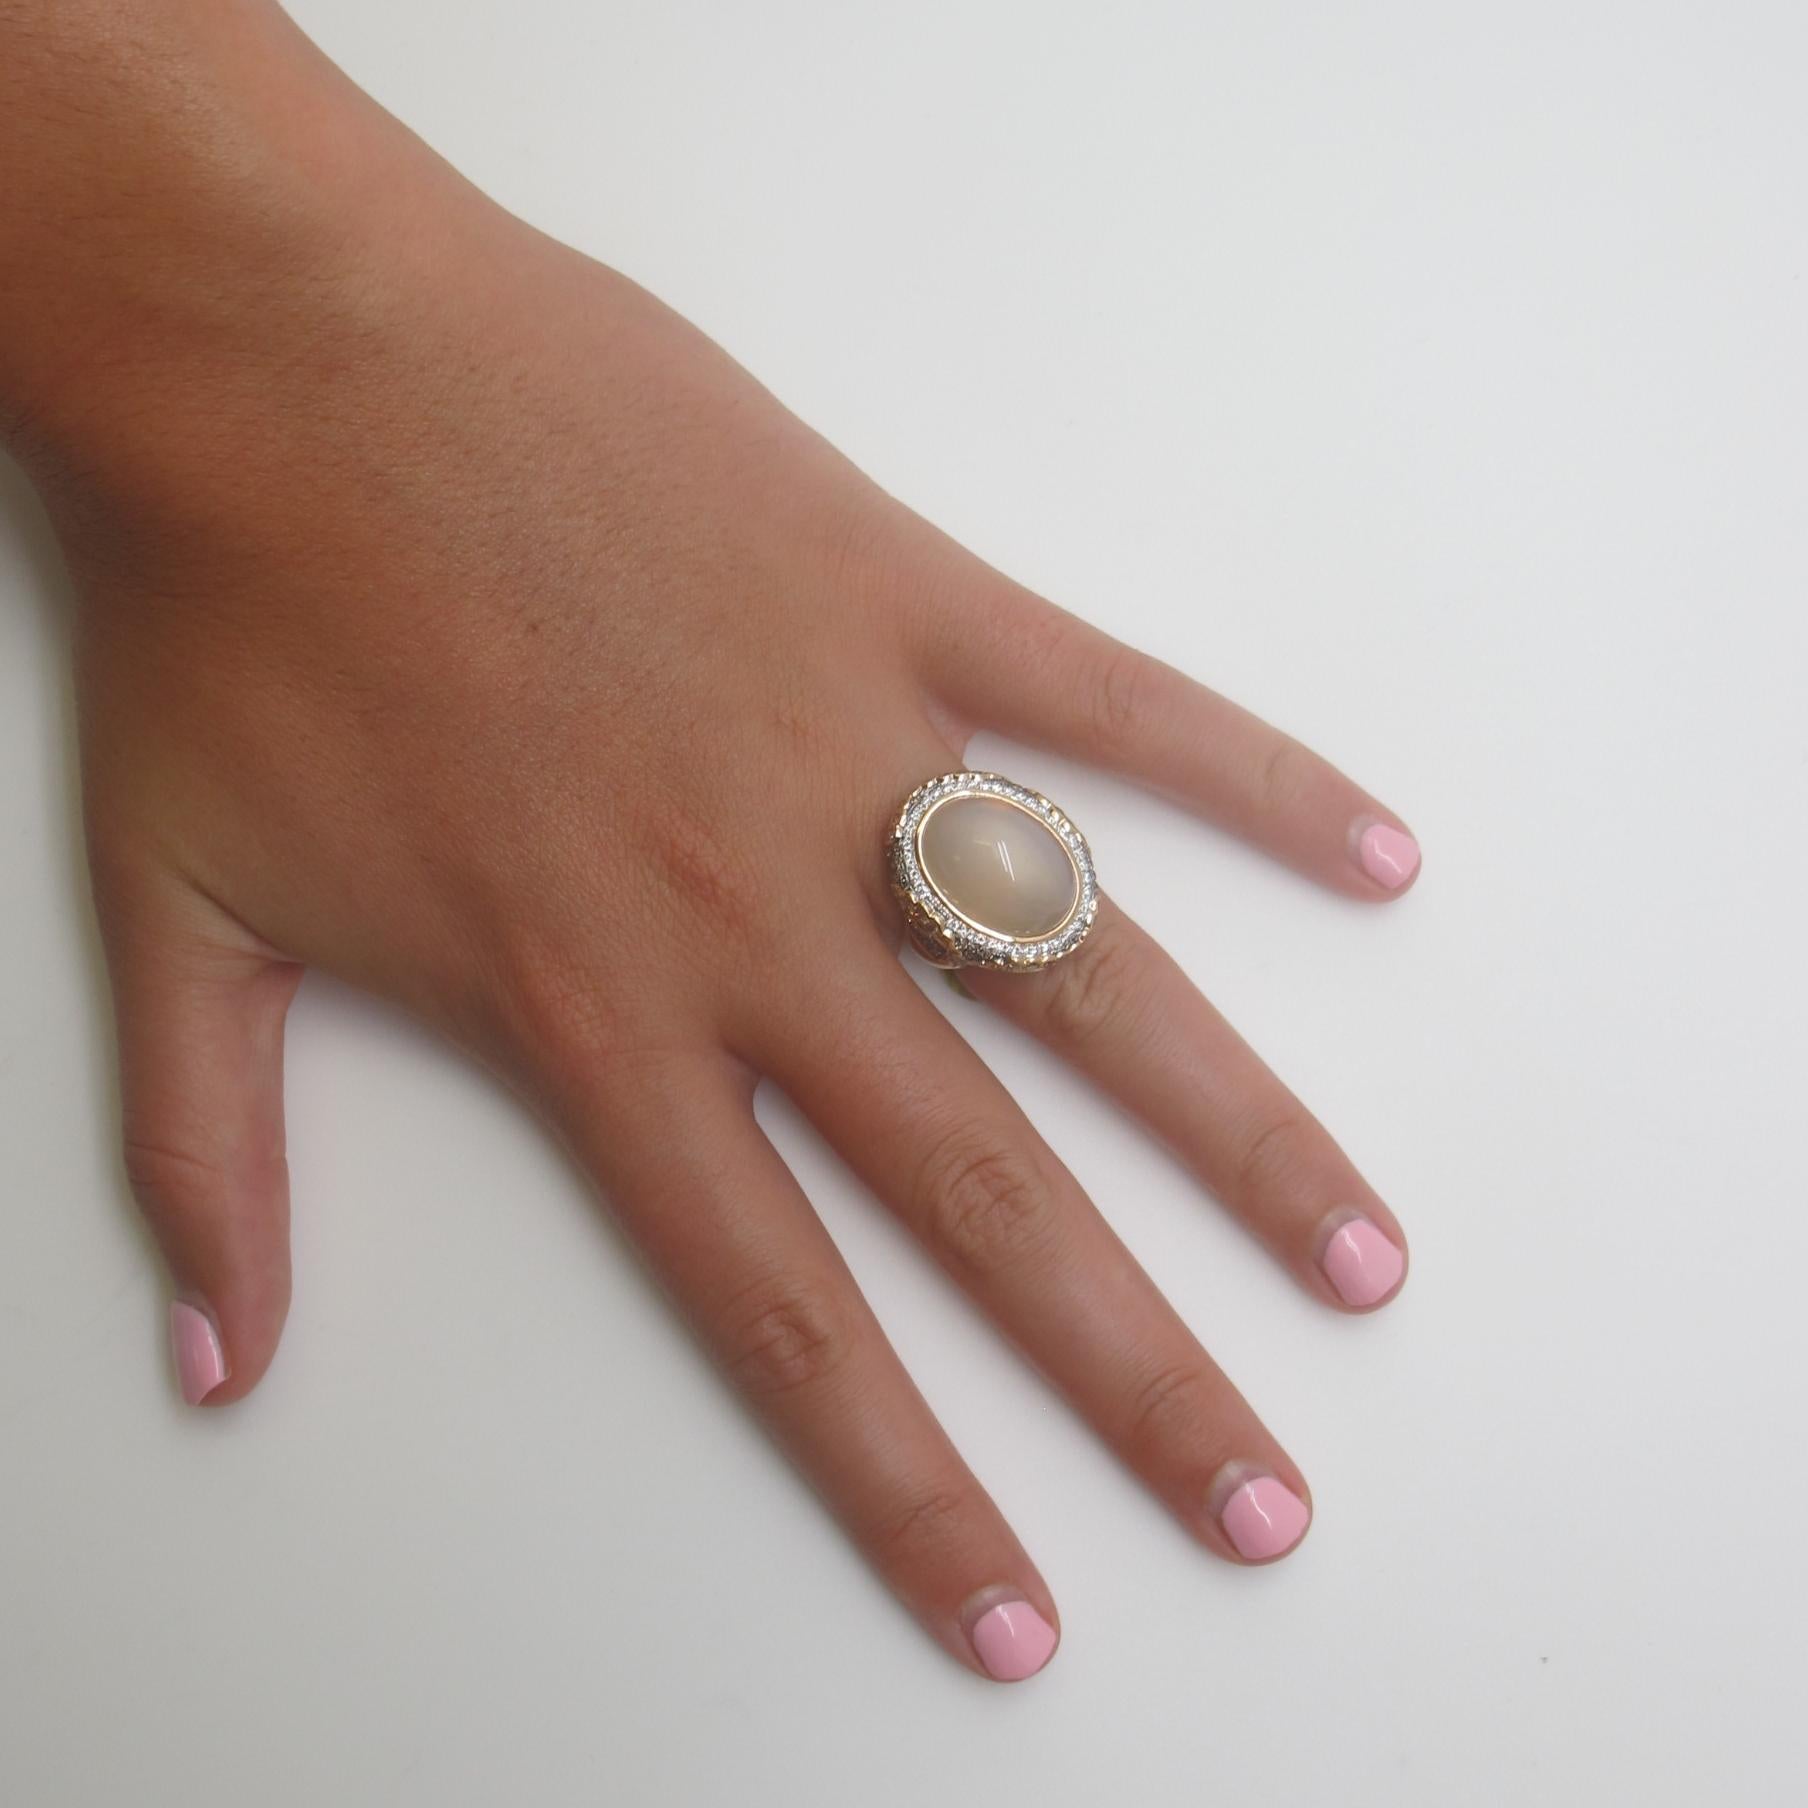 A large, oval moonstone (15.05cts) is featured in this ring of 18 karat rose gold.  It is a translucent 